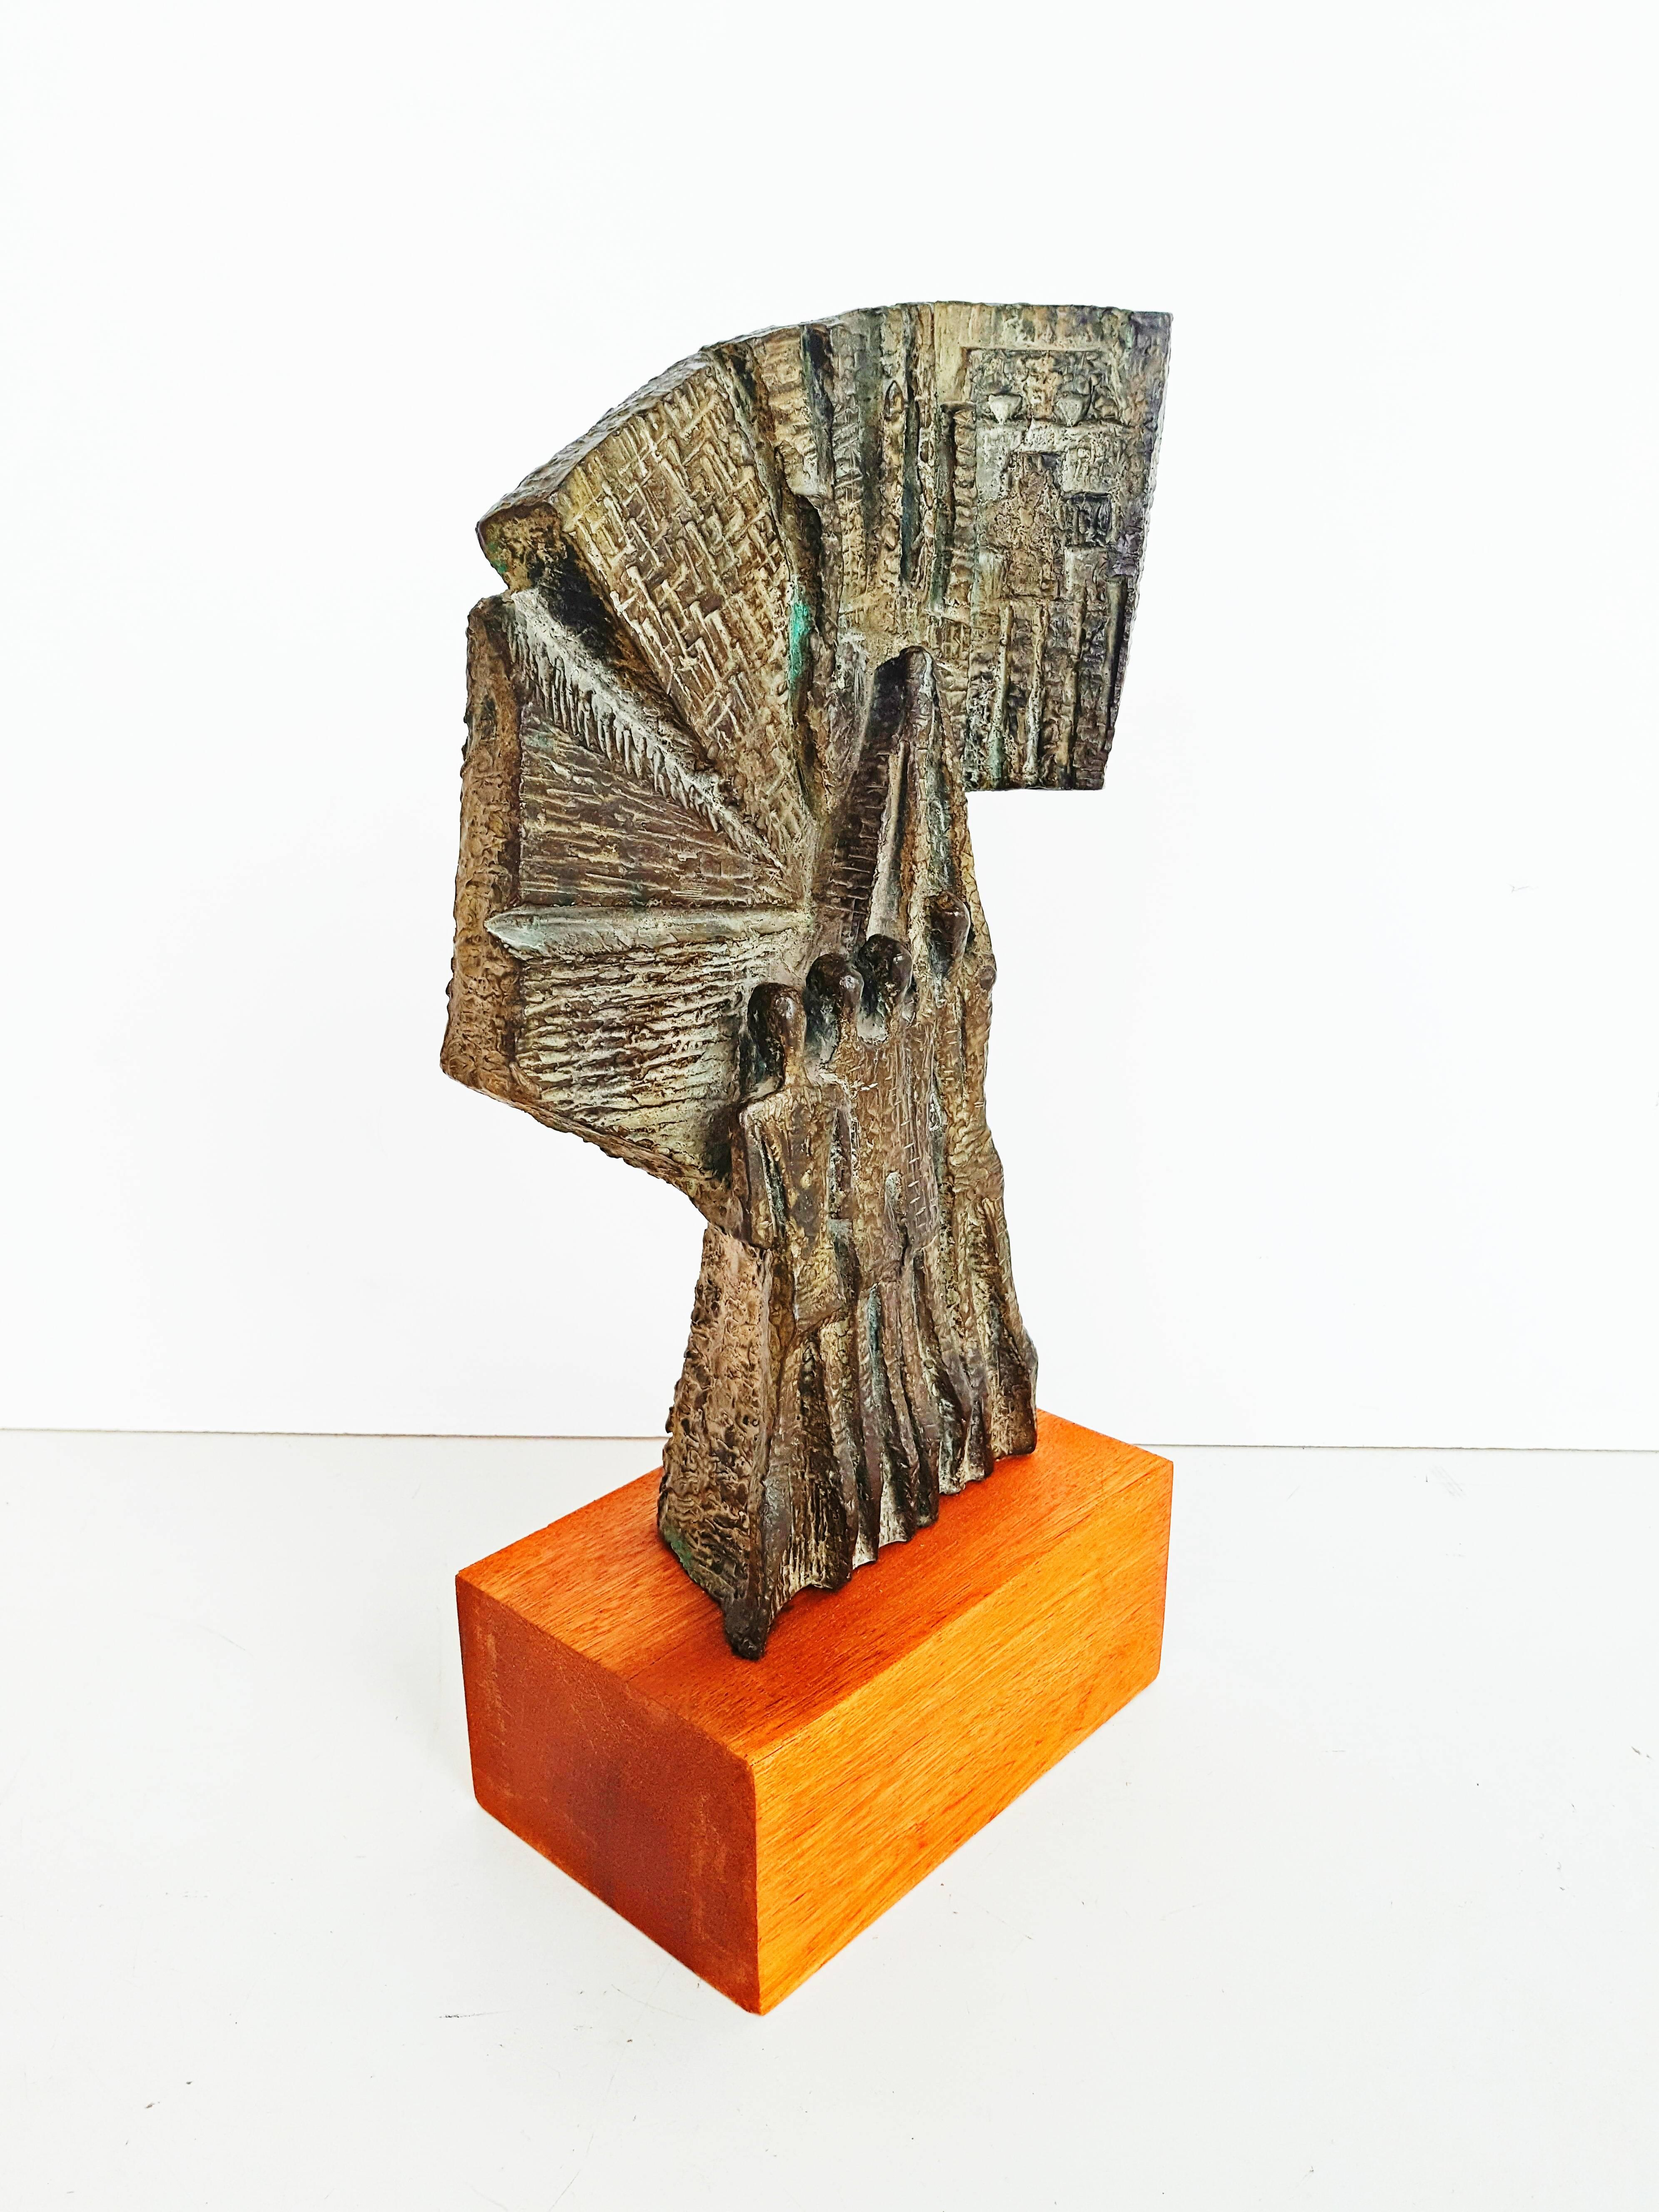 Rare and large Brutalist and modernist bronze sculpture signed, to be determined, manufactured in 1960s. In perfect vintage condition.